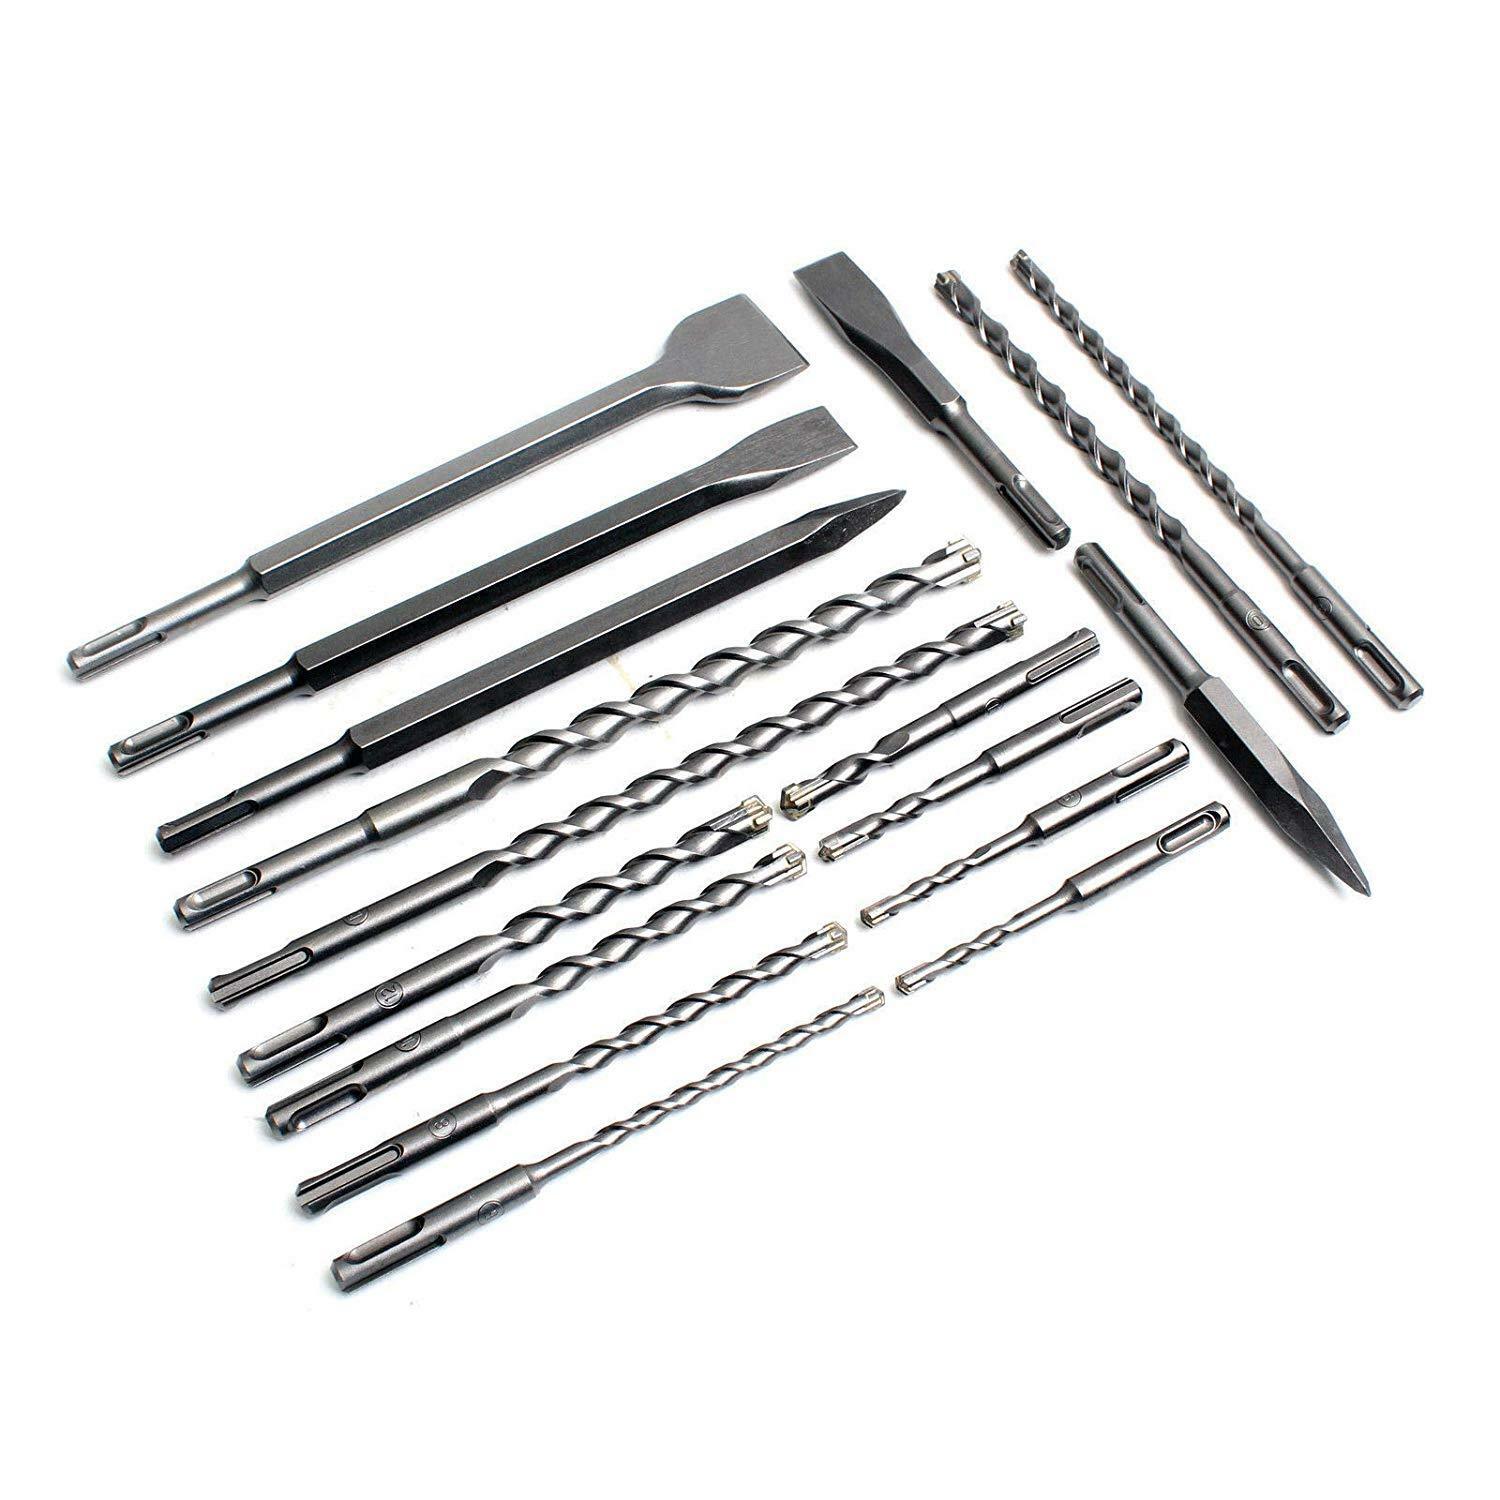 17 PC SDS PLUS ROTARY HAMMER BITS DRILL BIT & CHISEL GROOVE CONCRETE 